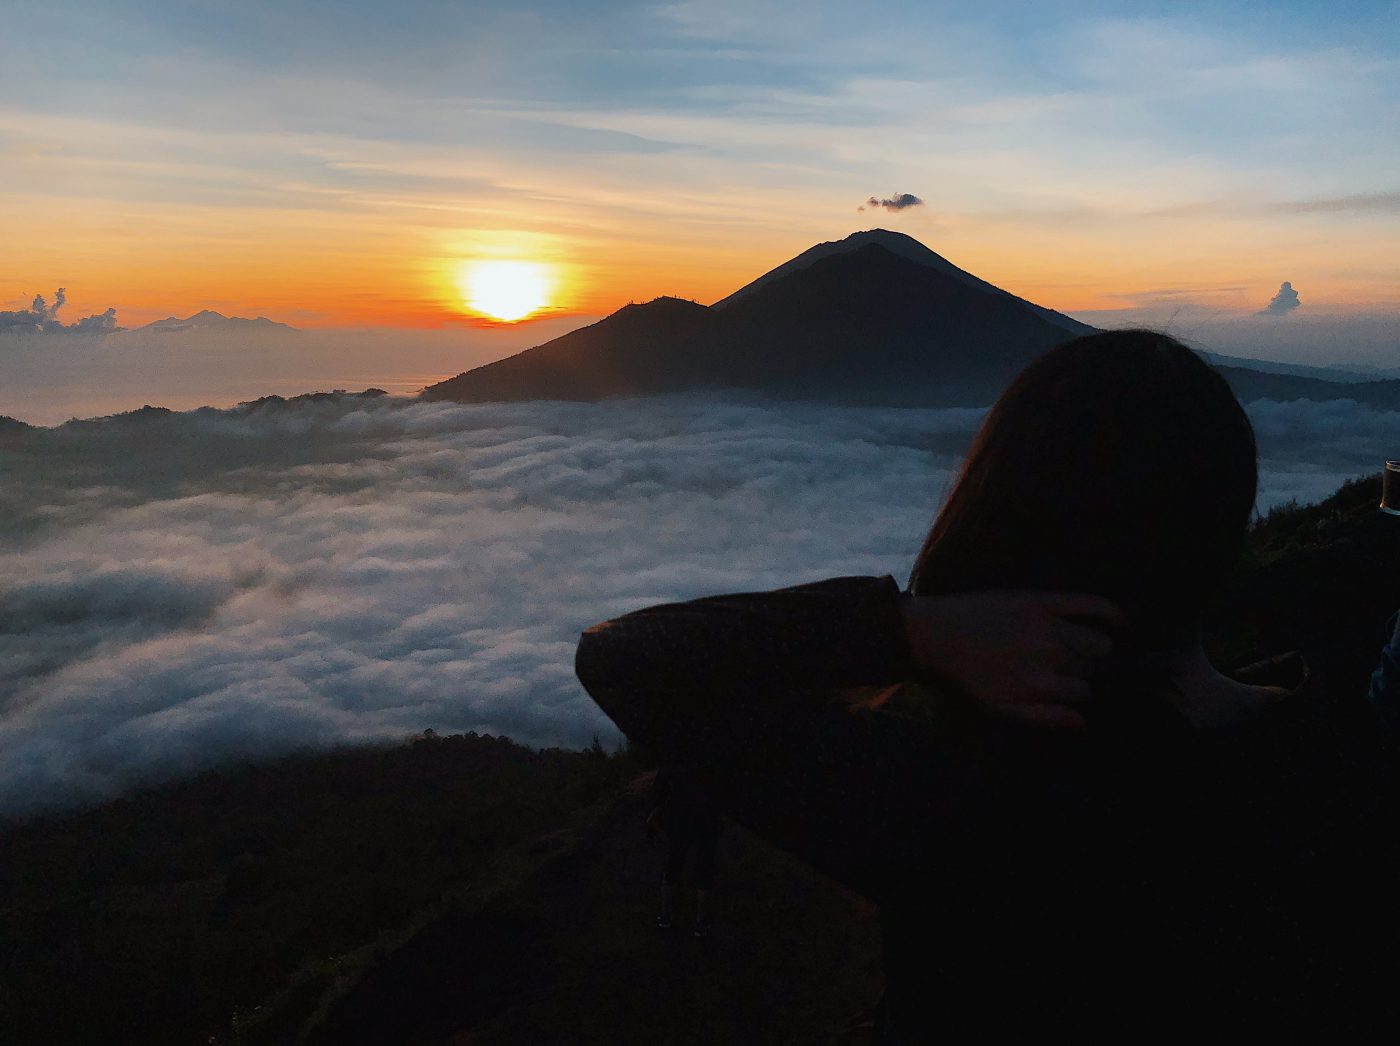 Waiting for the sunrise at Mount Batur